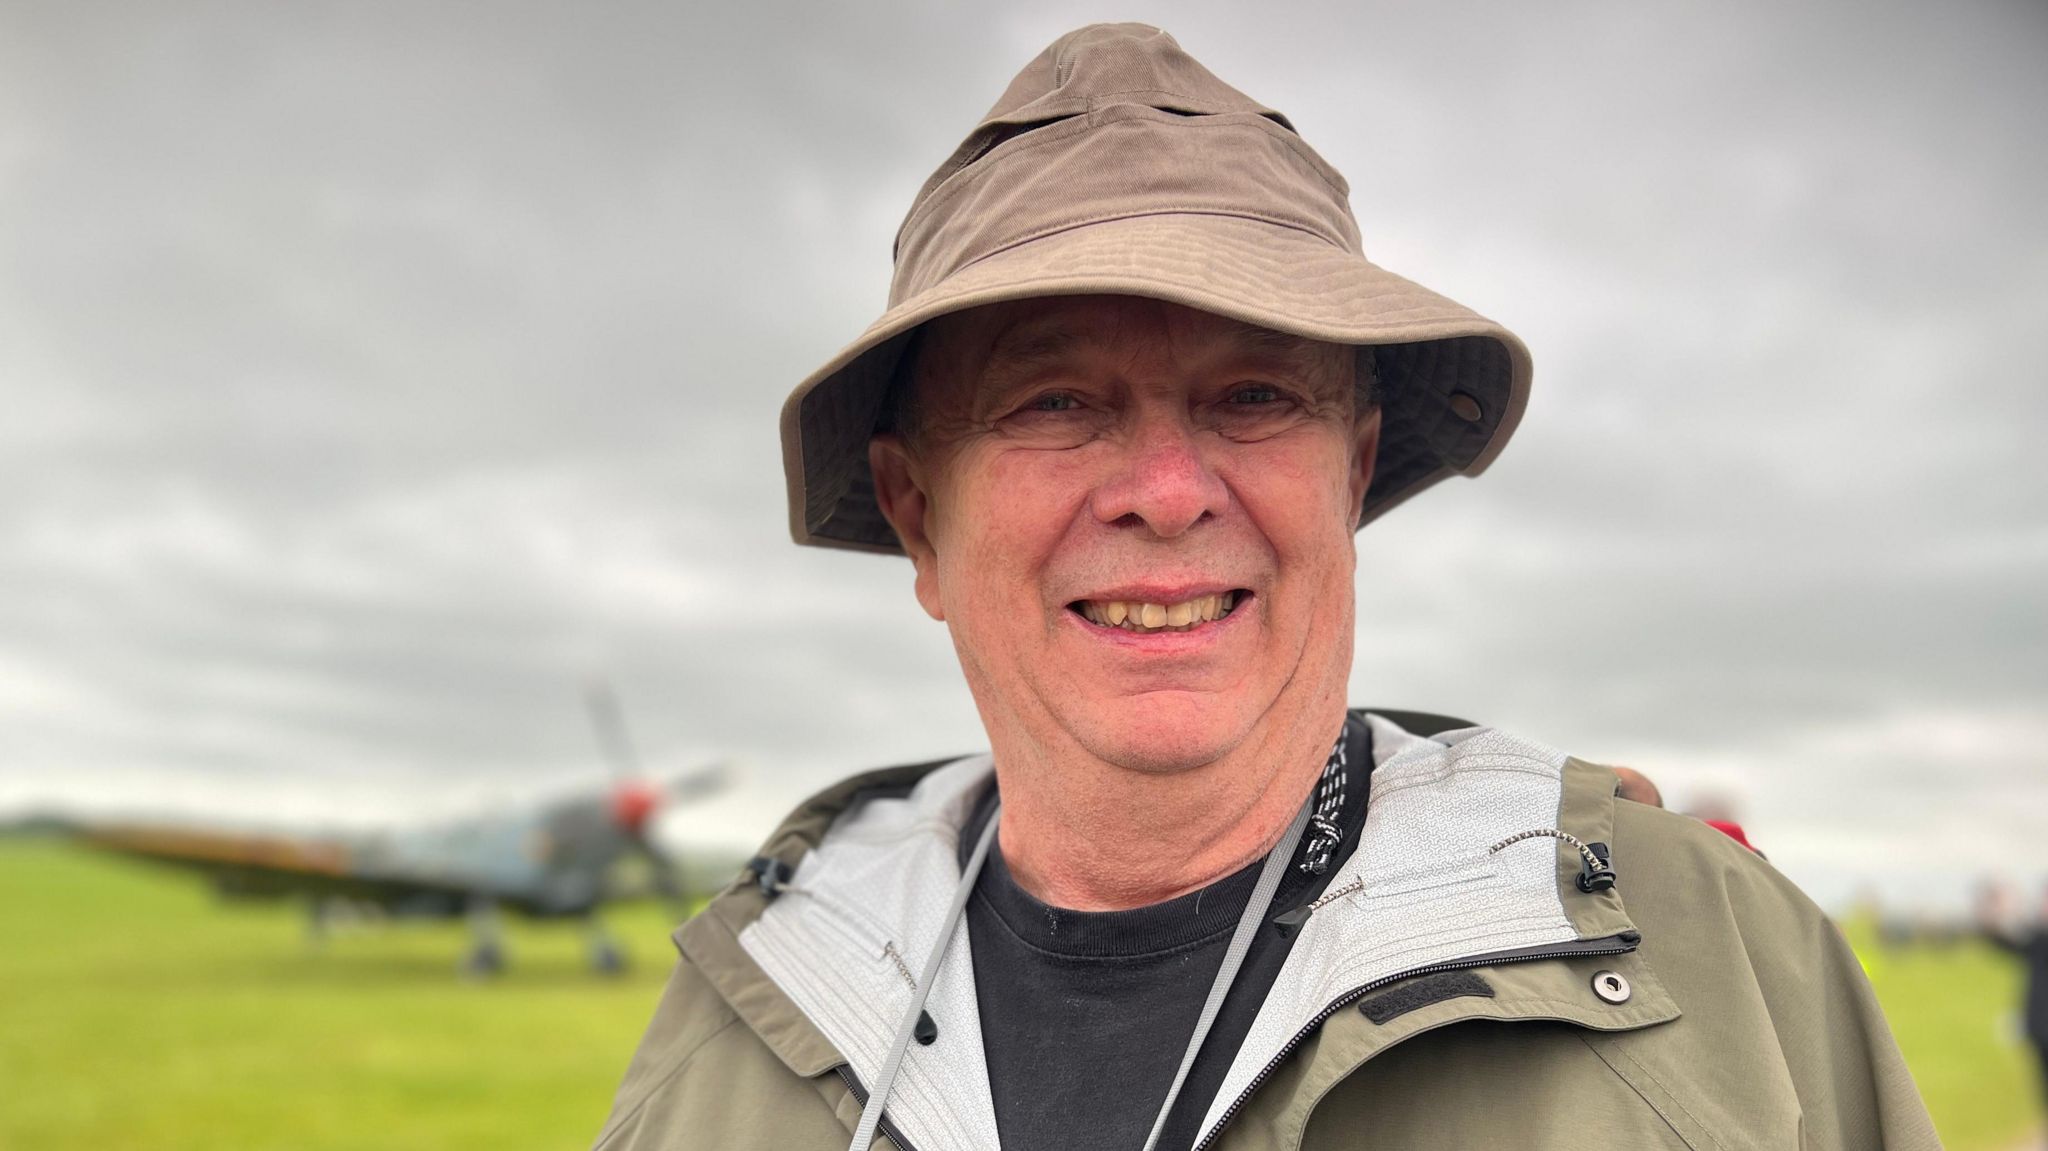 Donald Johnson wearing a beige hat and coat with the airfield and an aircraft behind him, Duxford